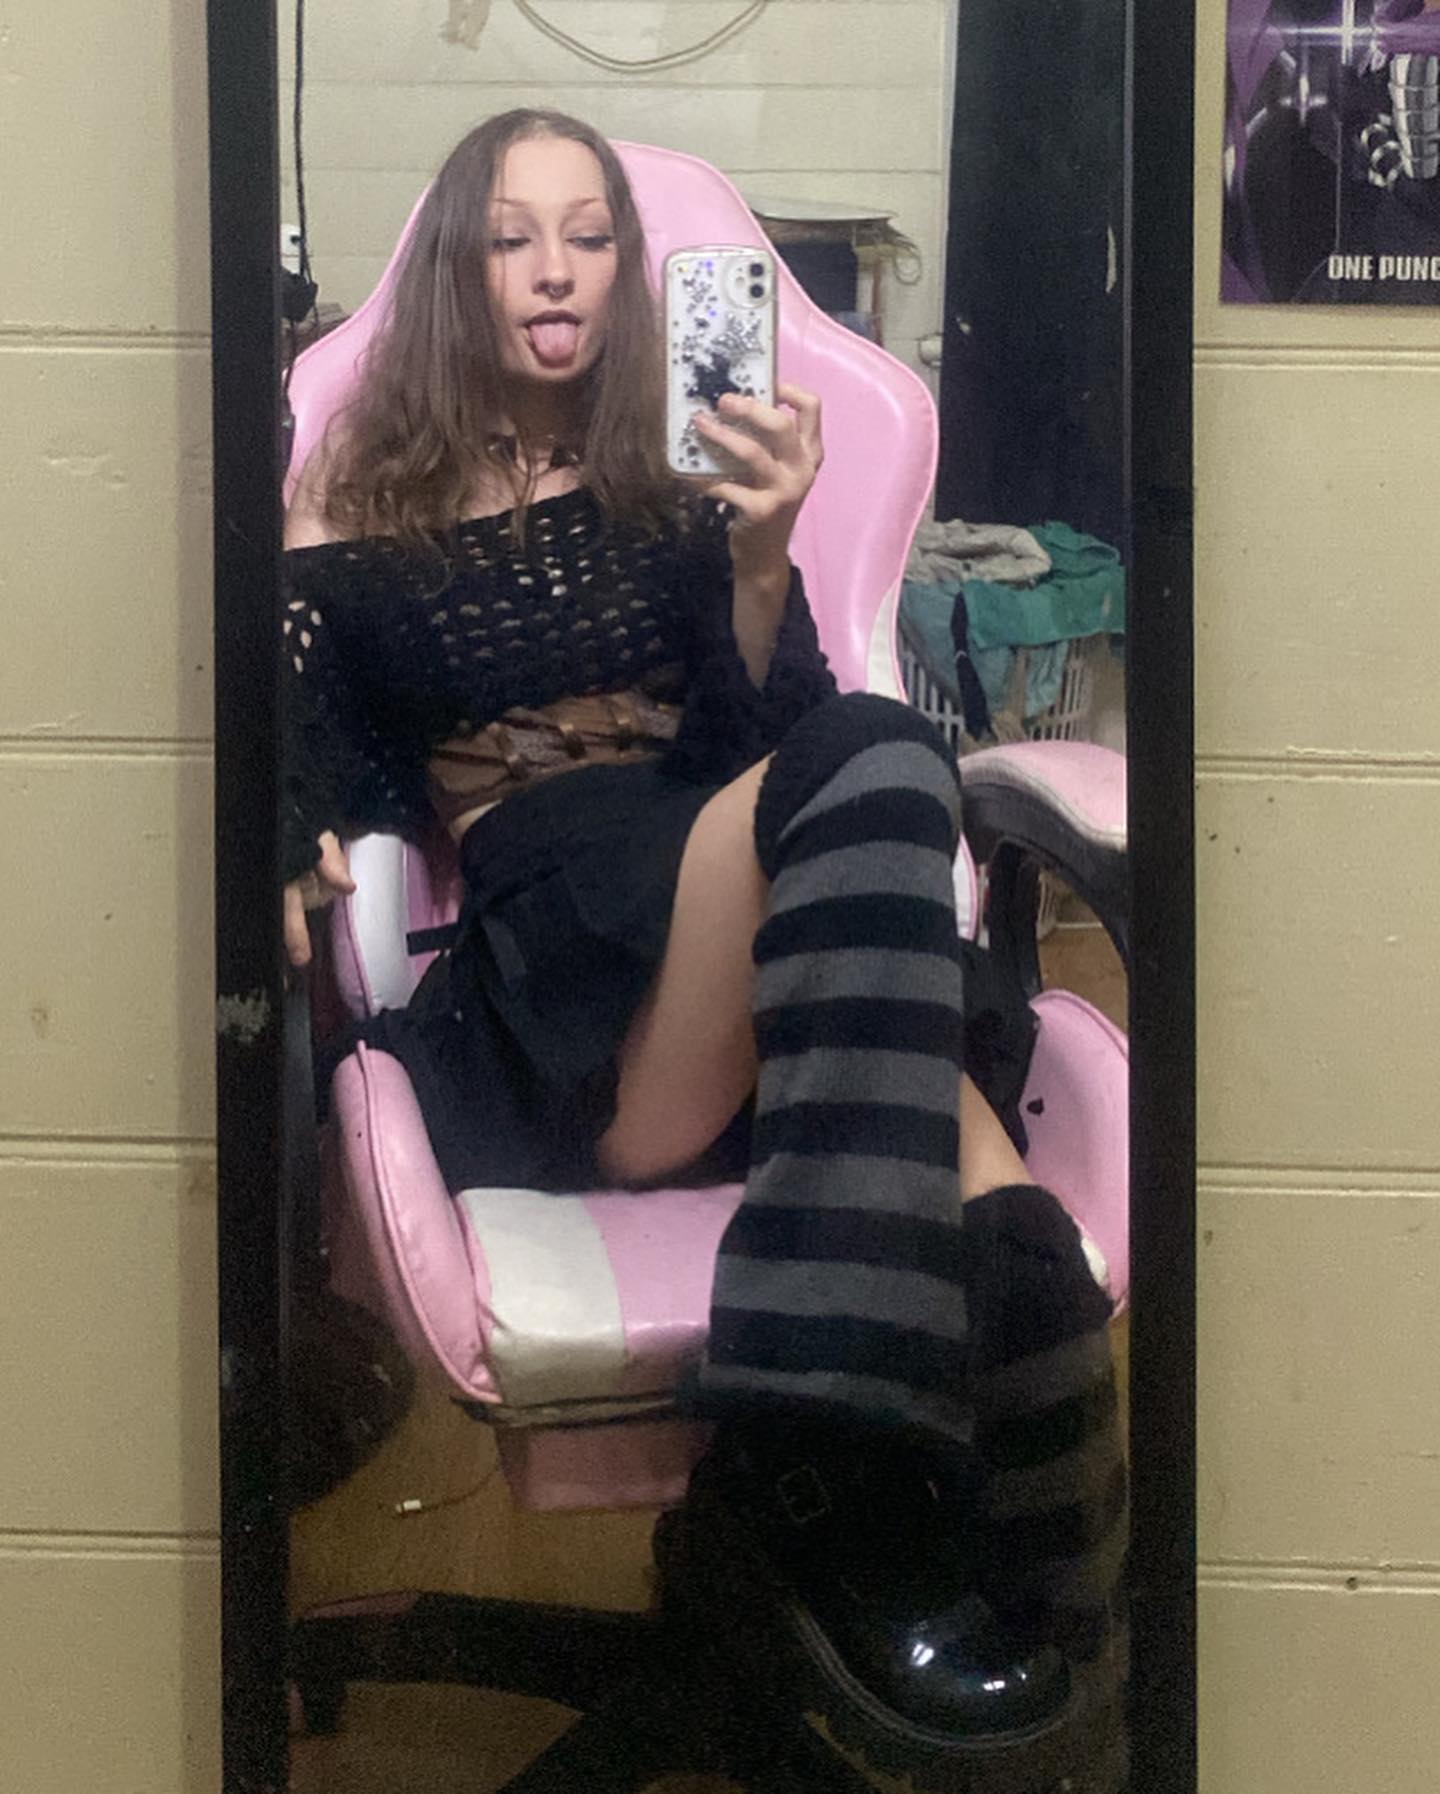 dying star ＊*•̩̩͙✩•̩̩͙*˚
•
• 
outfit ✩
skirt, leg warmers, knitted throw over ~ @romwe 
brown corset top, star phone case ~ @shein_au 

tags #aesthetic #outfitinspo #onlyfans #alt #alternative #onlyfangirl #onlyfriends #outfitoftheday #ootd #contentcreator